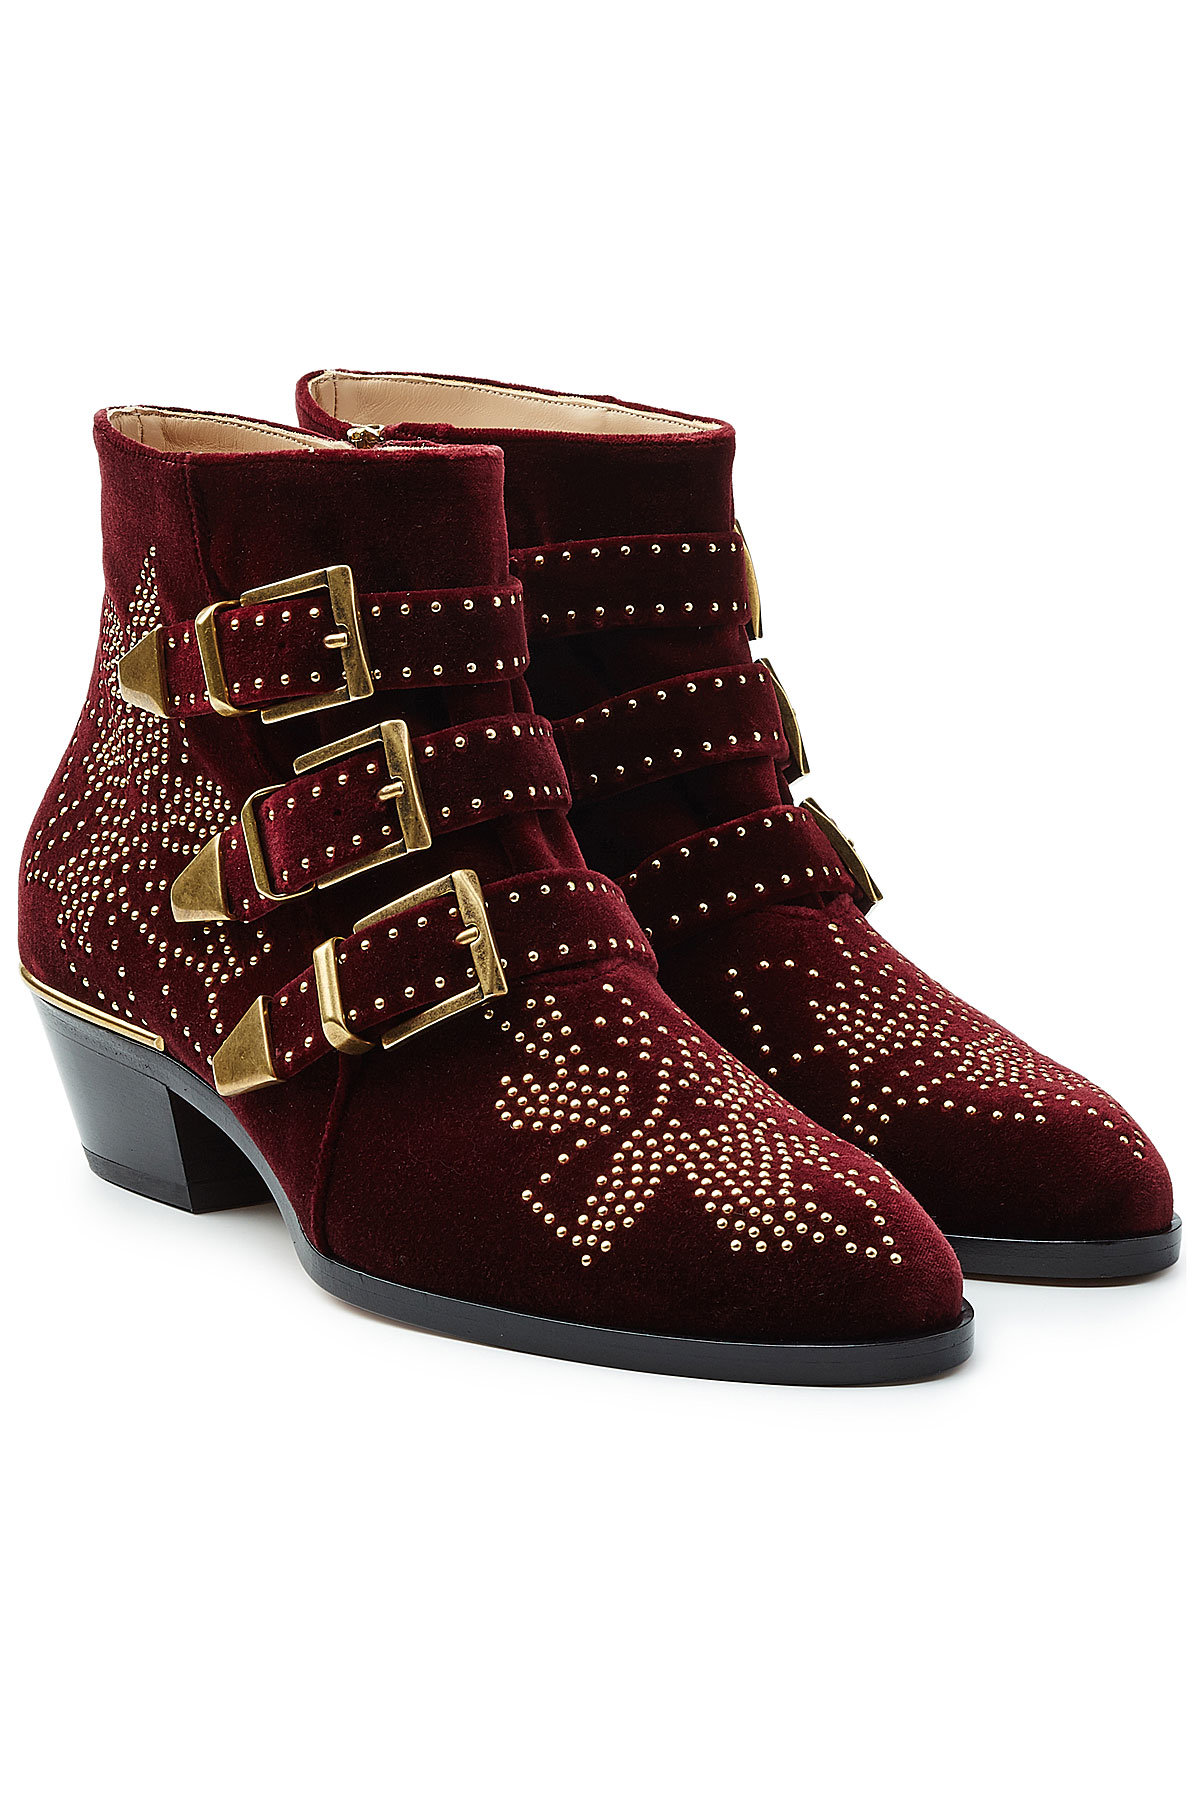 Chloe - Studded Susanna Suede Ankle Boots